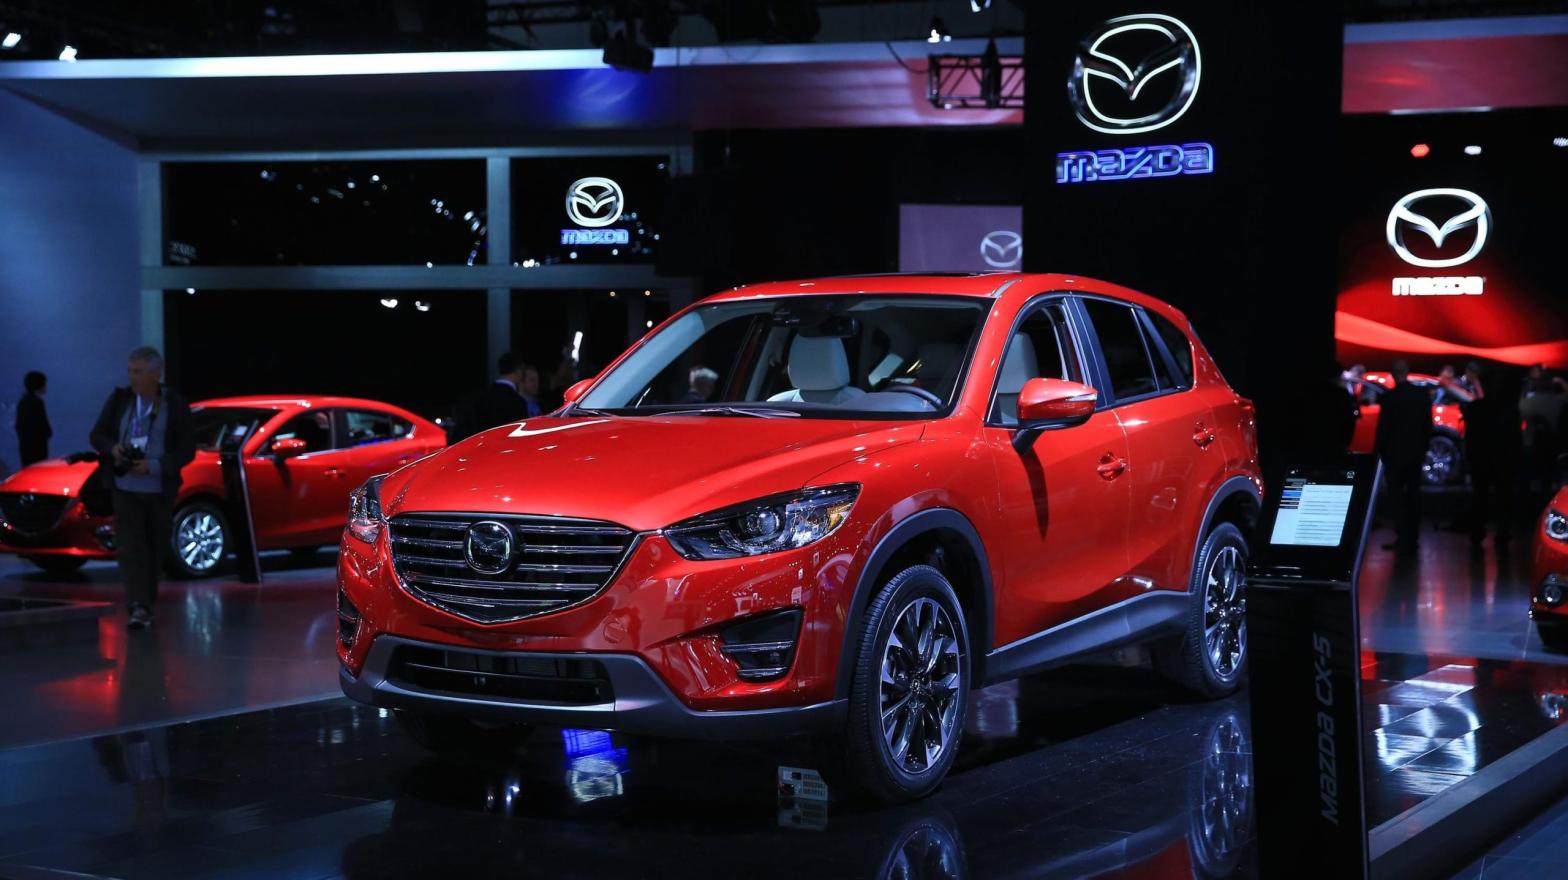 A 2014 Mazda CX-5, matching the models described to be experiencing the KUOW radio glitch; used here as stock photo. (Photo: Victor Decolongon / Getty Images for Mazda Motor Co, Getty Images)